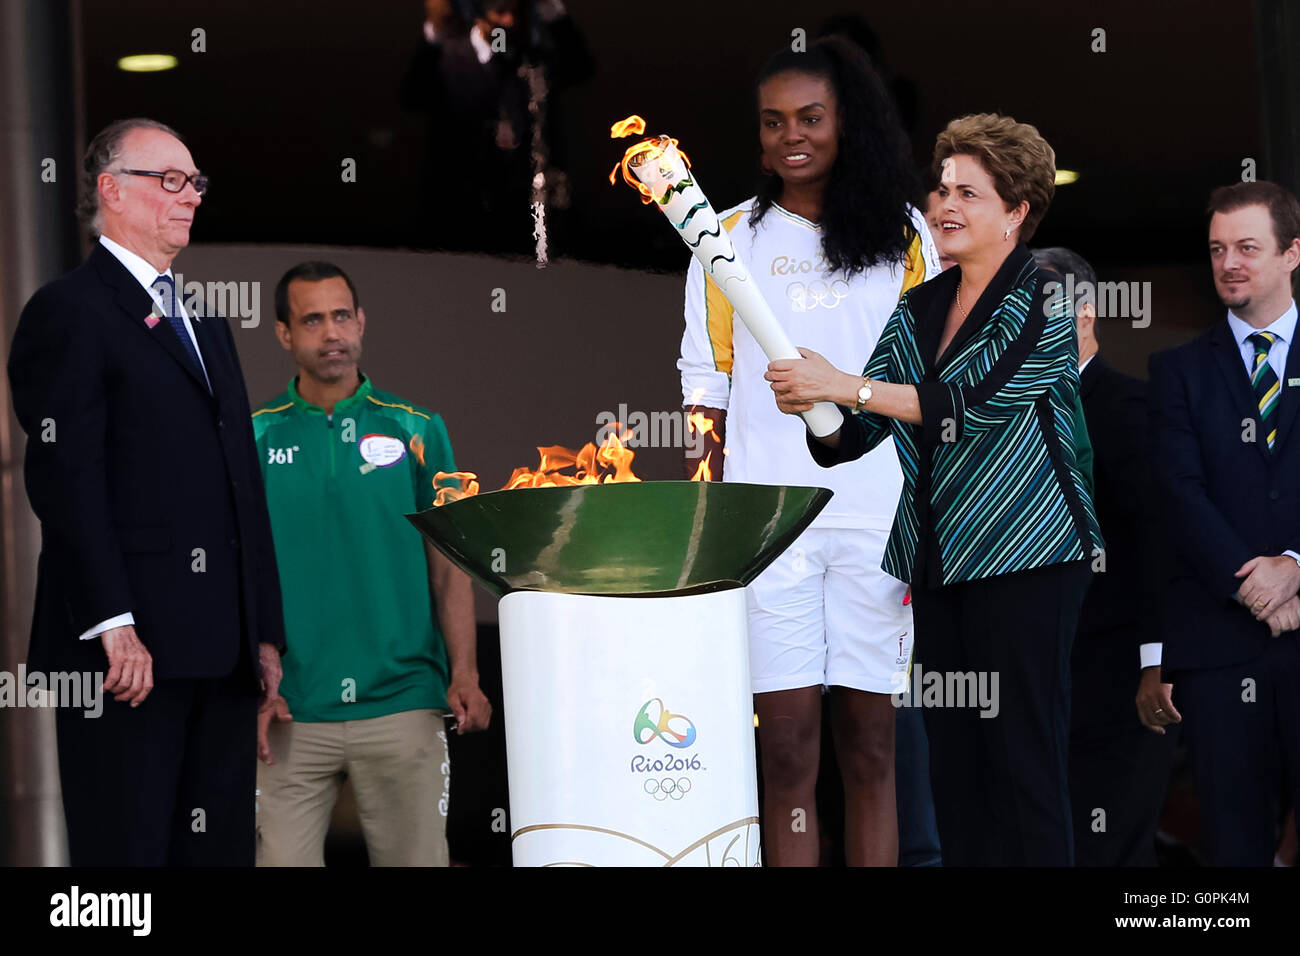 Brazilian President Dilma Rousseff lights the Olympic flame as Brazilian volleyball player Fabiana Claudino looks on during the lighting ceremony at Planalto presidential palace May 3, 2016 in Brasilia, Brazil. The torch relay will begin a three month journey around Brazil before arriving for the Rio de Janeiro Olympics in August. Stock Photo